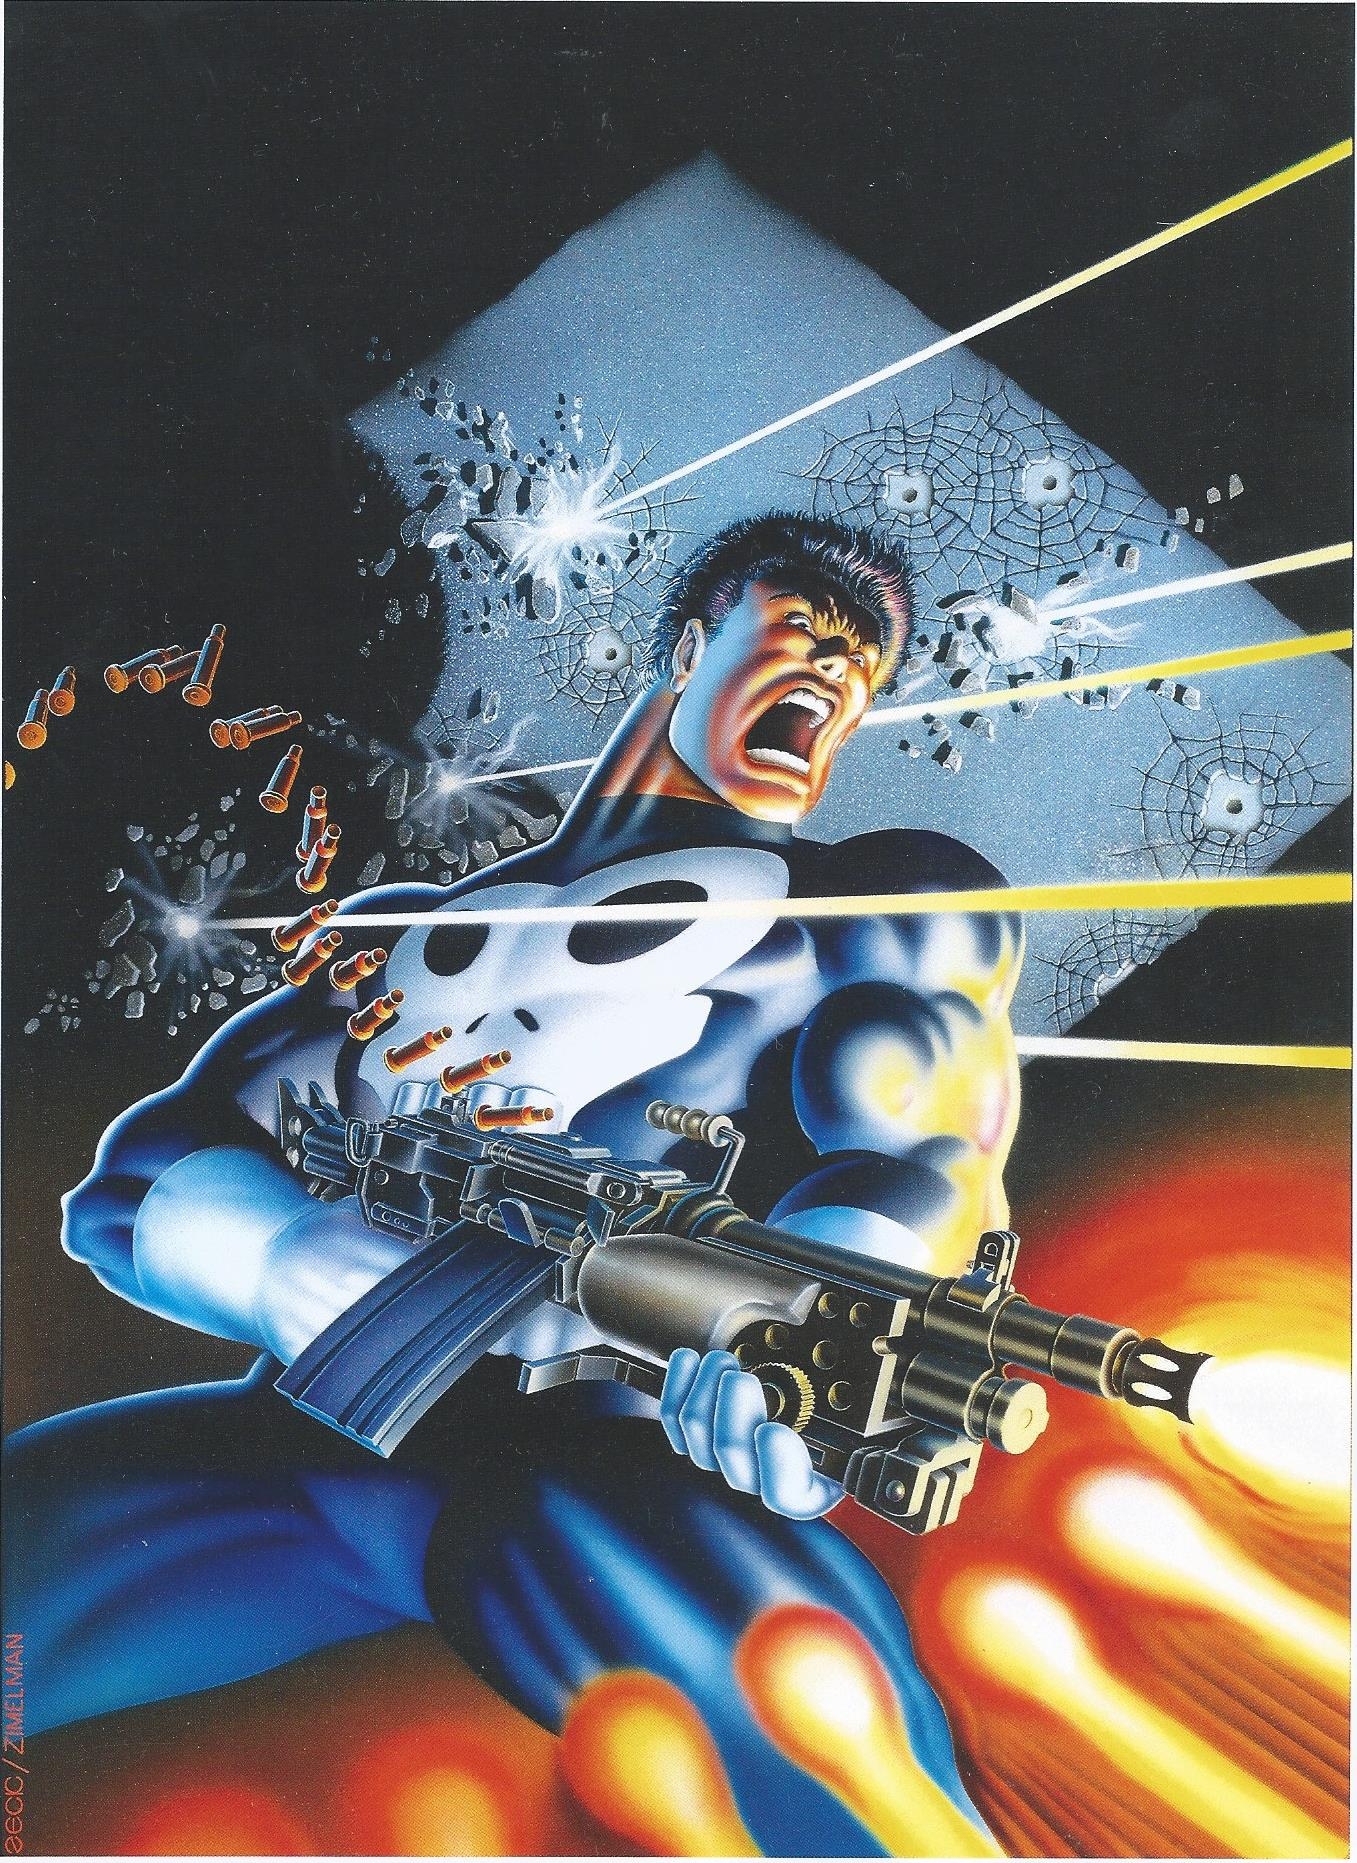 1985 Marvel Press Punisher Poster MIKE ZECK & PHIL ZIMELMAN, in Charles  Costas's PERSONAL COLLECTION - My Punisher Grails!!! Comic Art Gallery Room